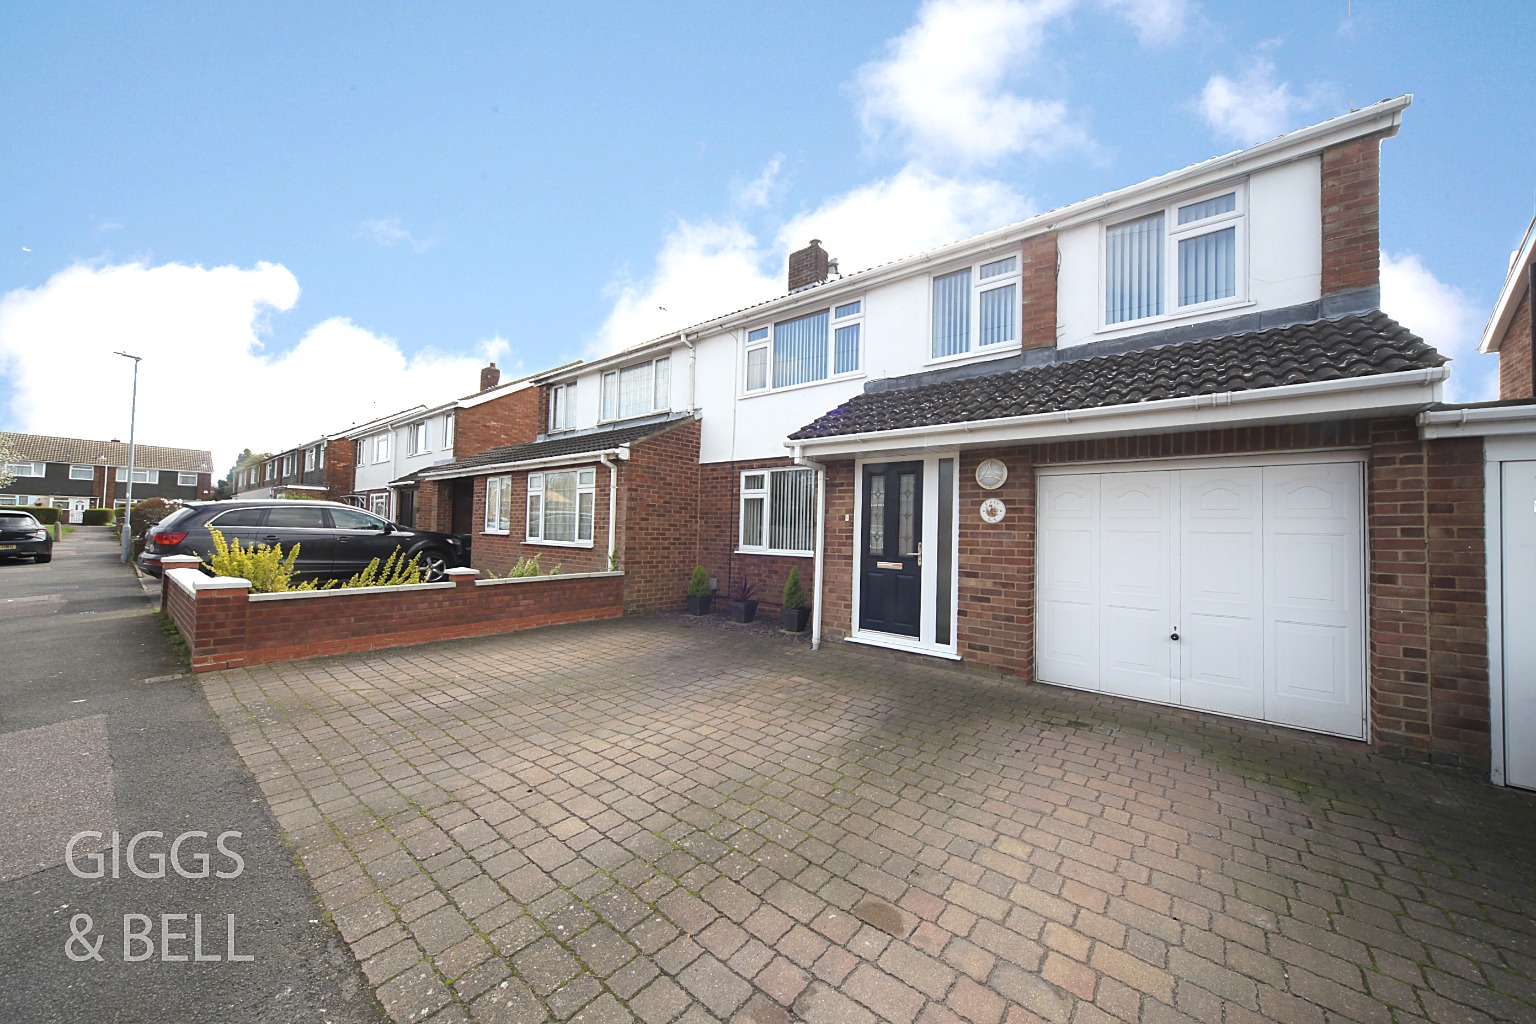 4 bed semi-detached house for sale in Kinross Crescent, Luton - Property Image 1